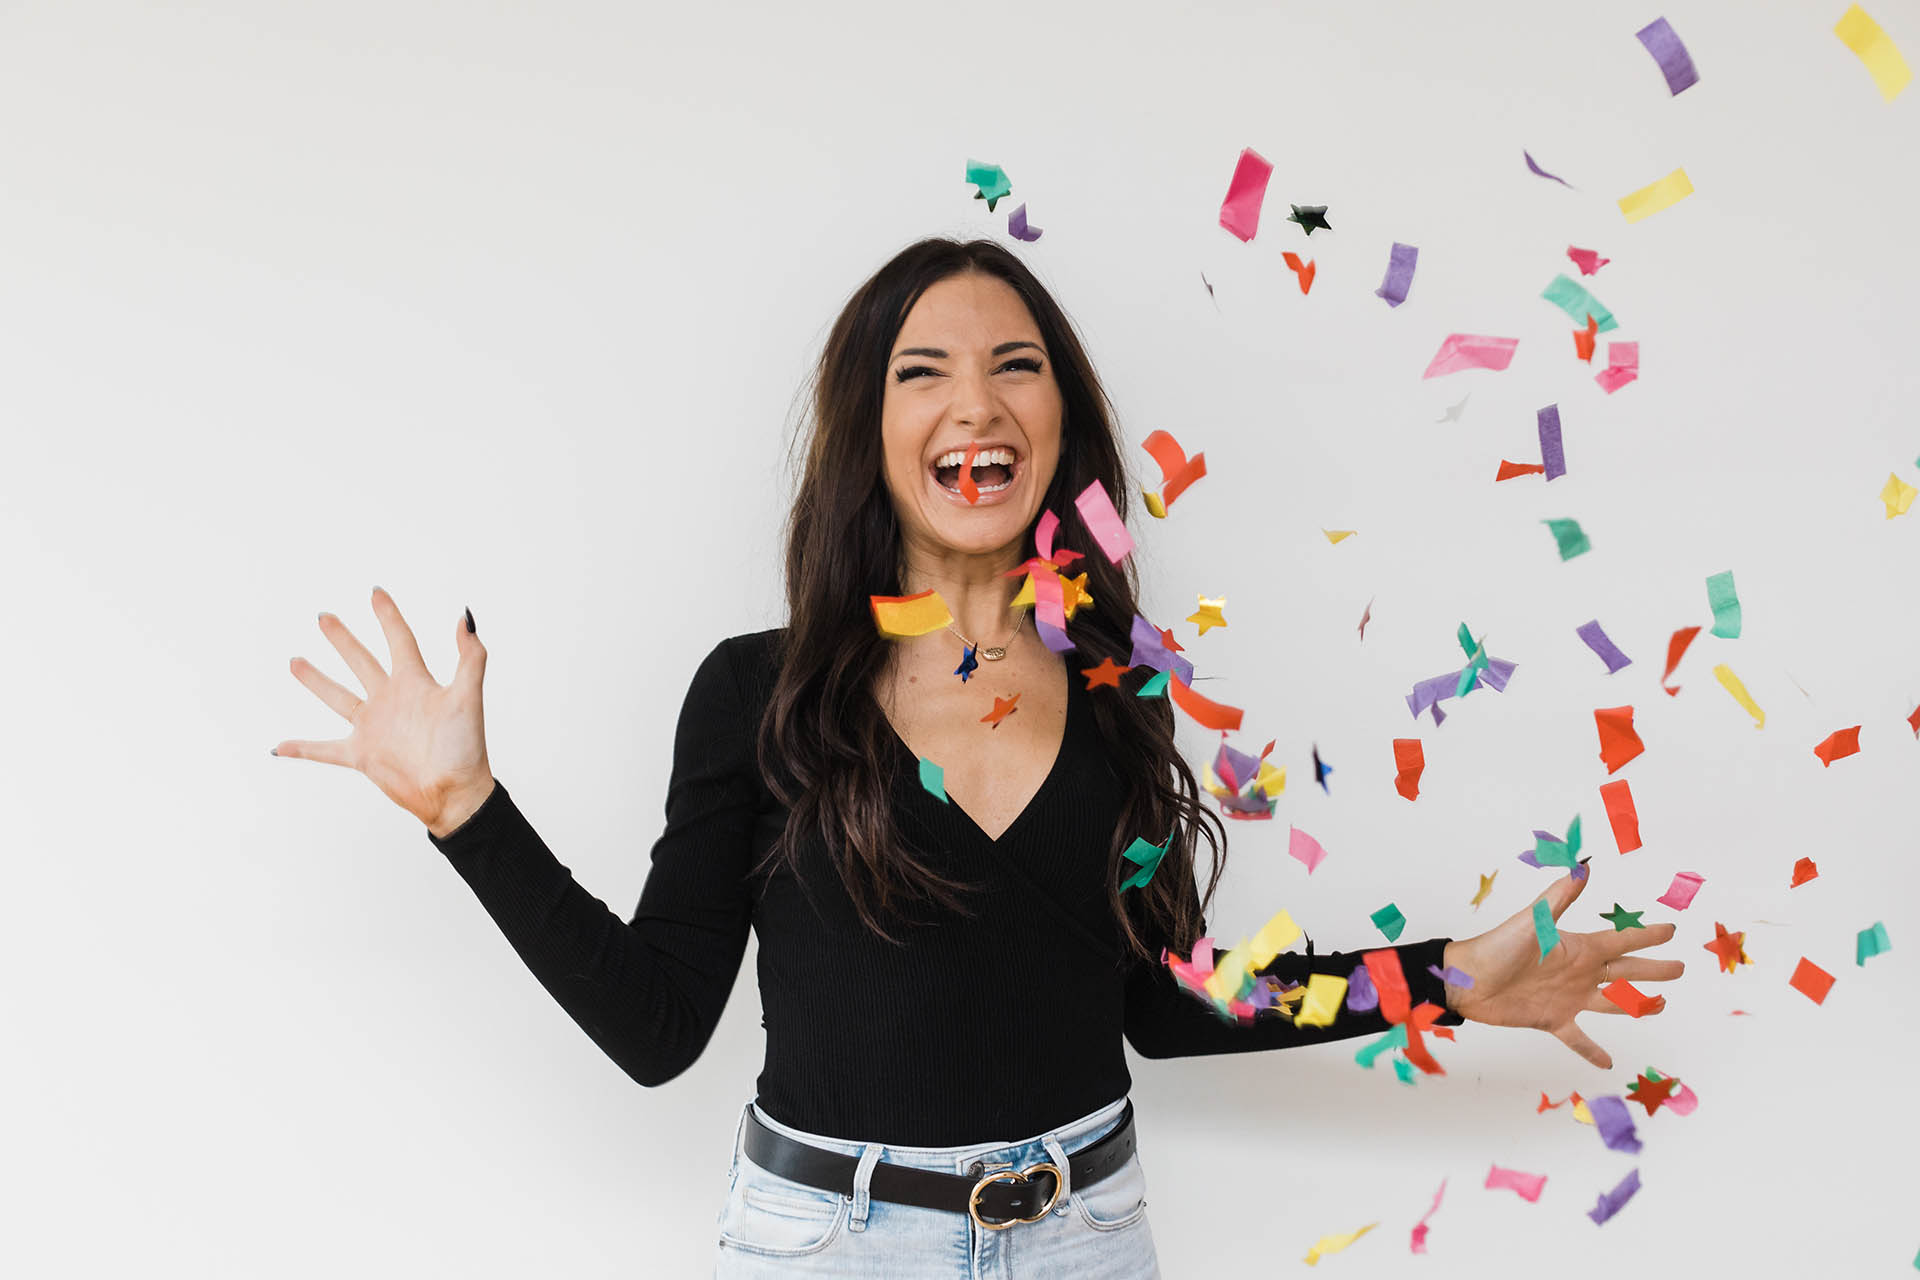 Caucasian woman in a black shirt and jeans smiling joyously after tossing confetti into the air in front of a white backdrop